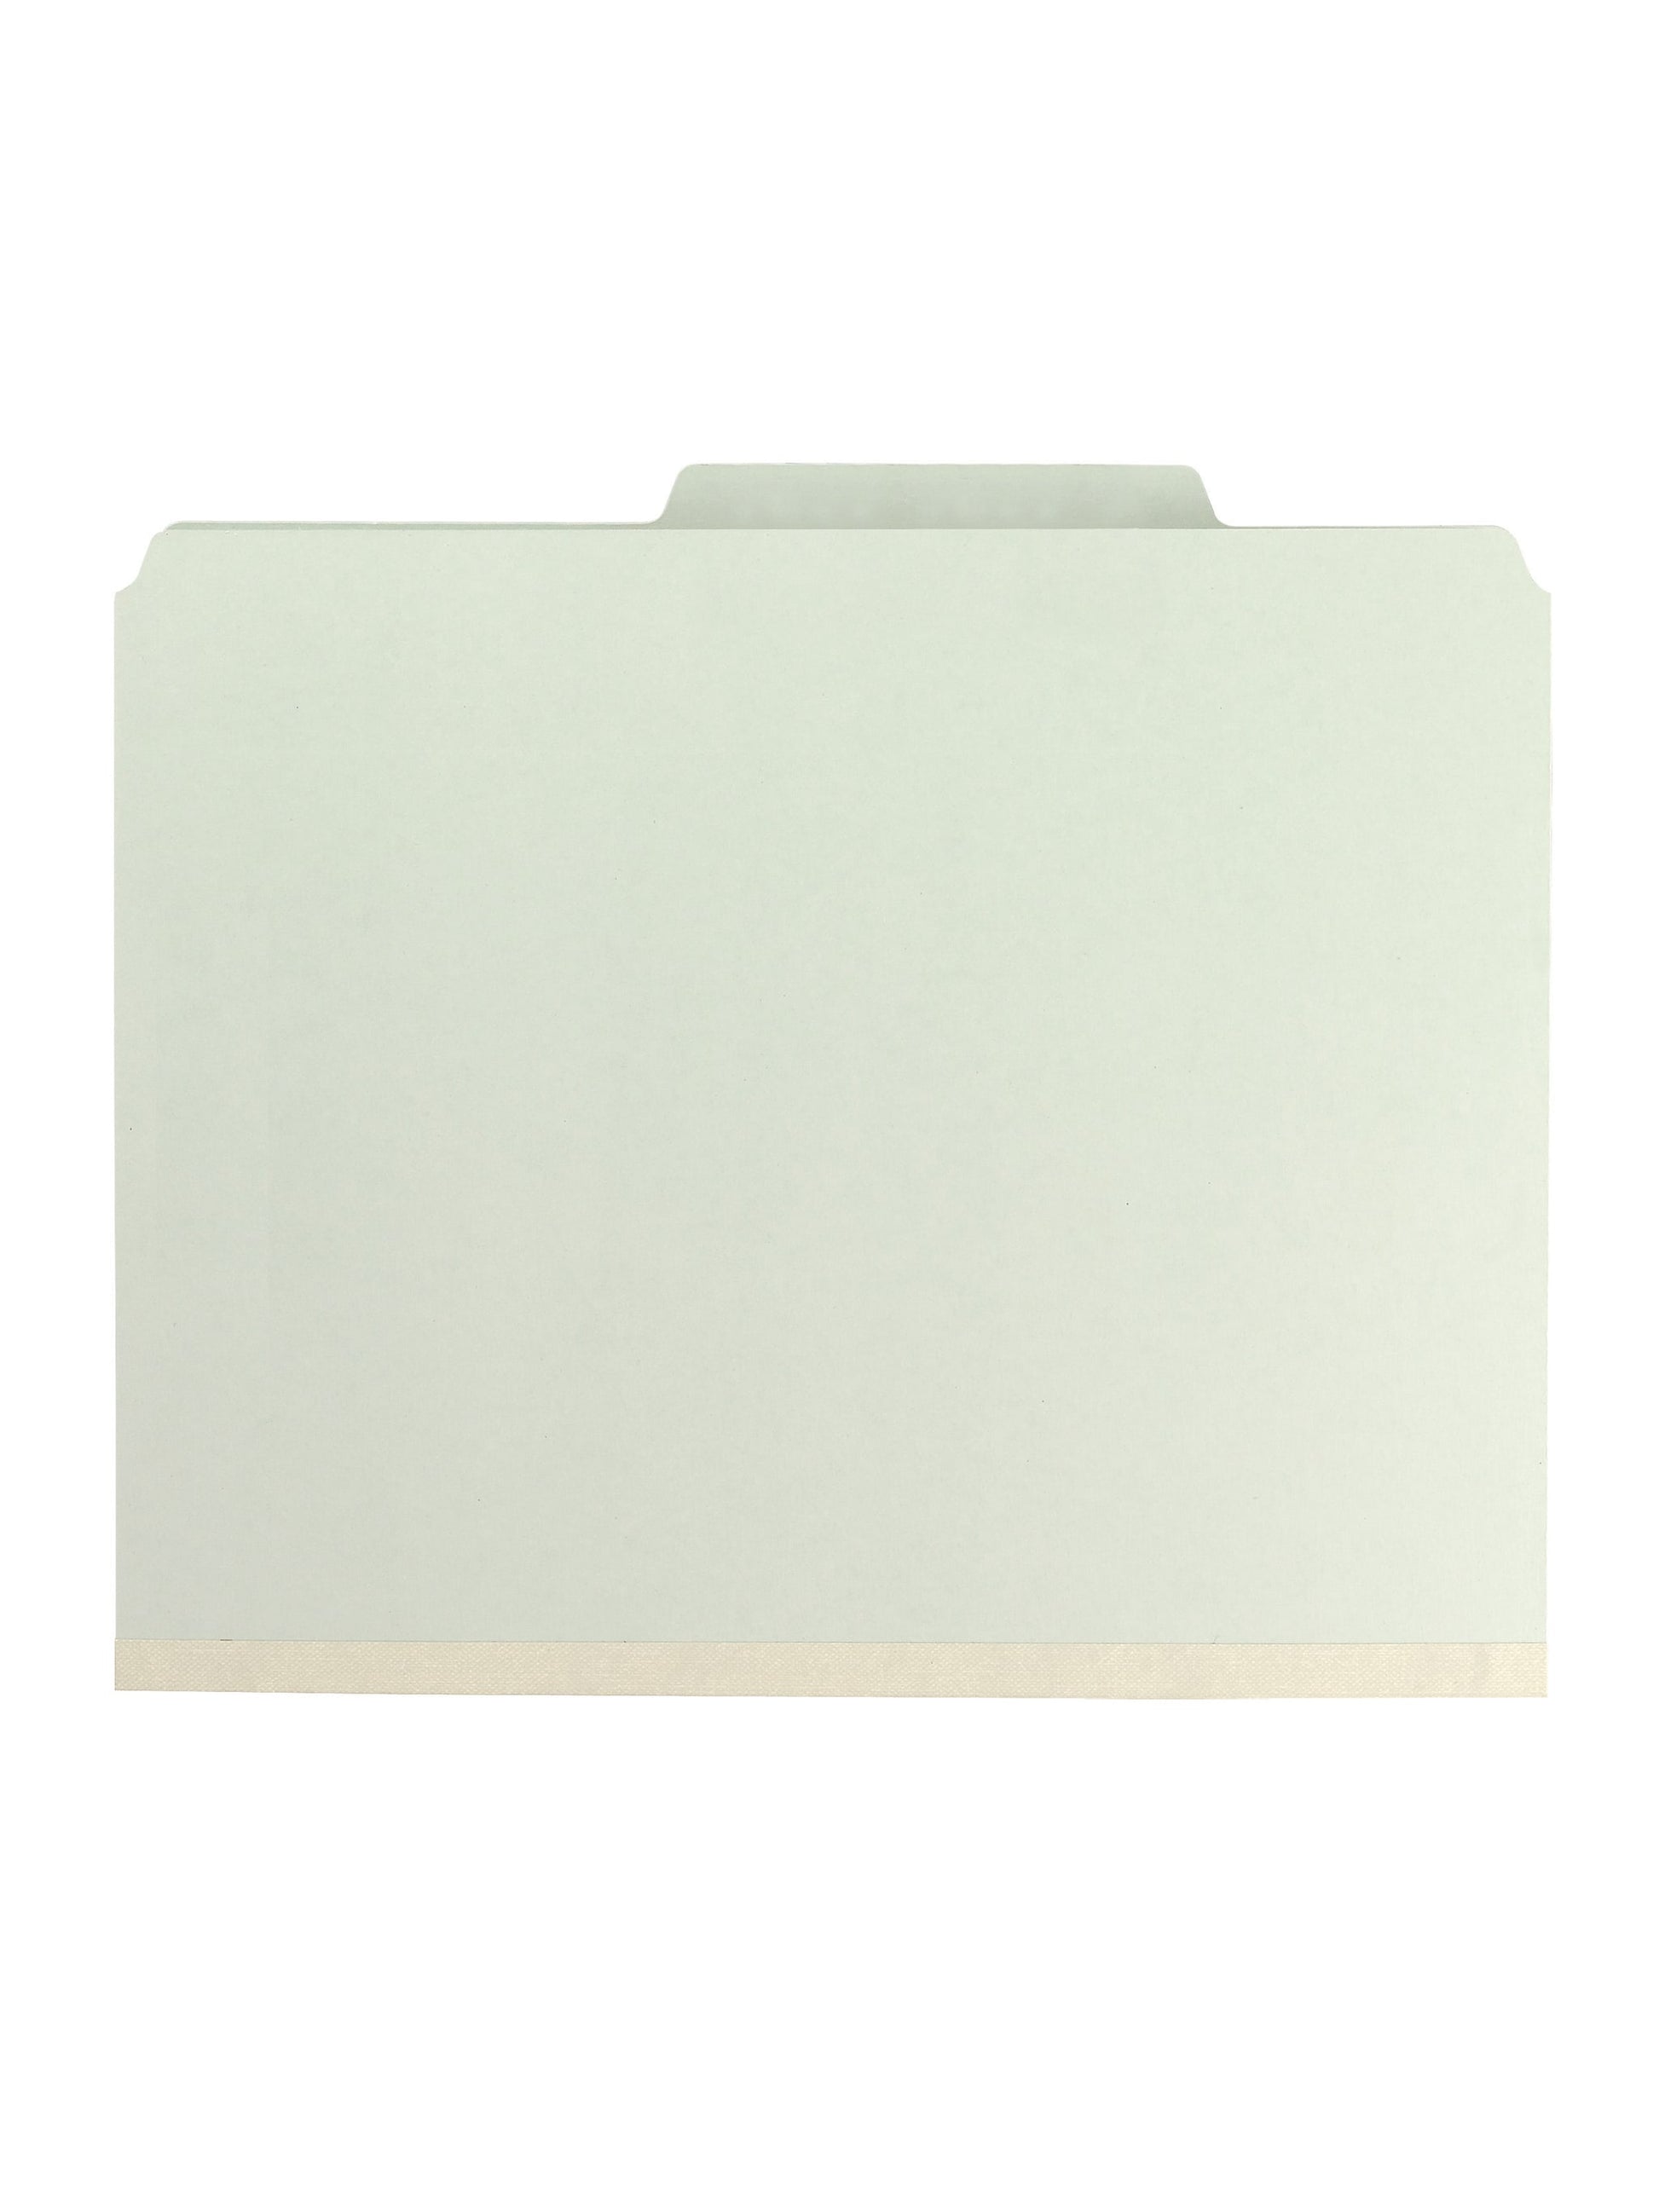 SafeSHIELD® Pressboard Classification File Folders, 2 Dividers, 2 inch Expansion, 2/5-Cut Tab, 60% Recycled , Gray/Green Color, Letter Size, Set of 20, 086486140744